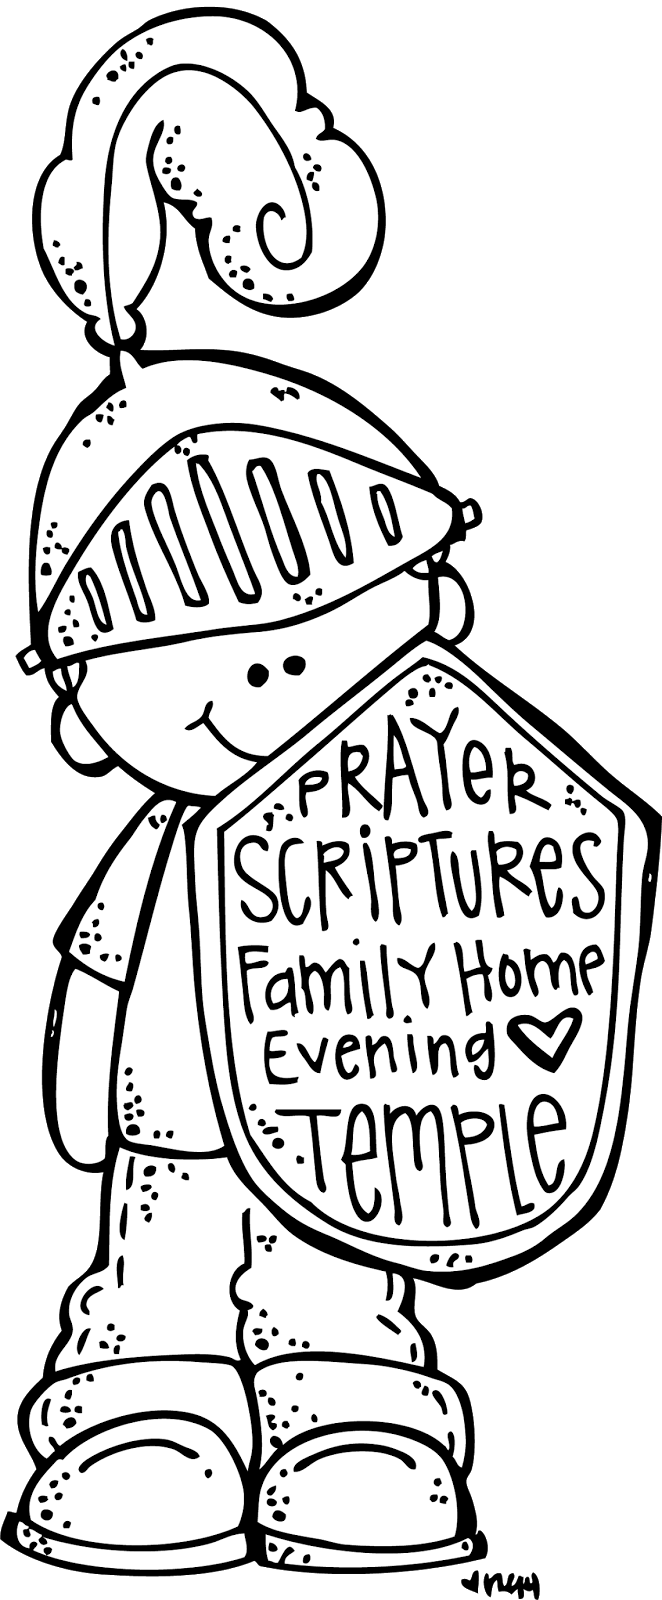 Melonheadz lds illustrating conference inspirations oct family home evening lds nursery lds coloring pages